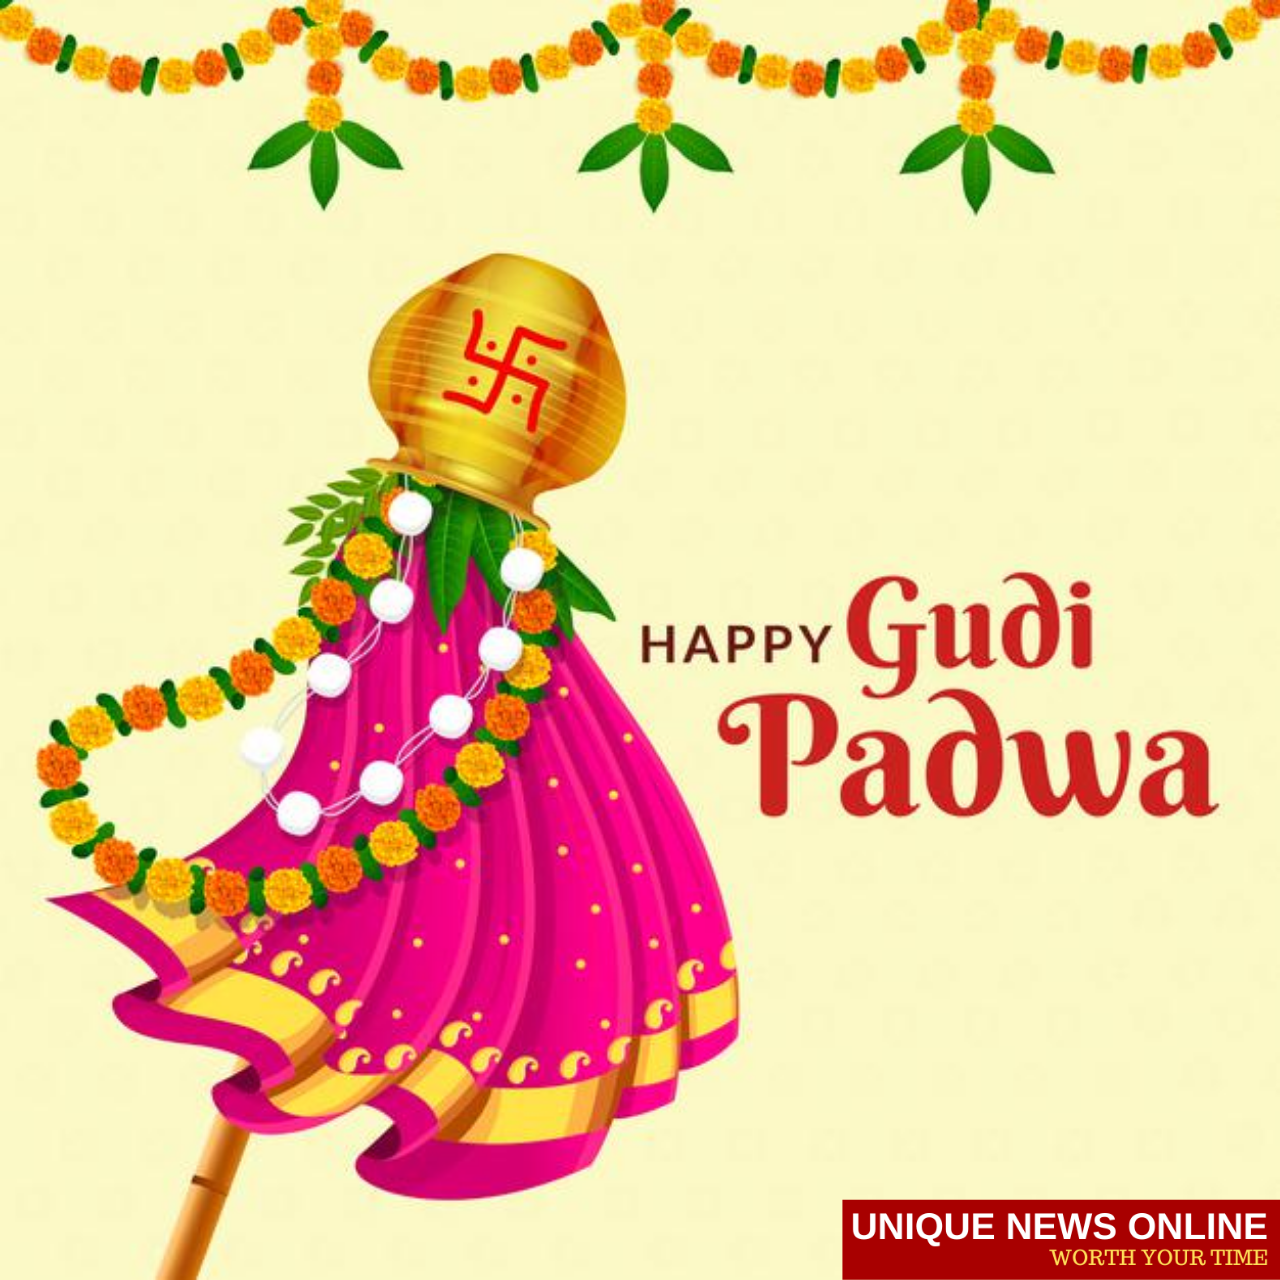 Happy Gudi Padwa 2021 Wishes, Messages, Greetings, Quotes, and Images